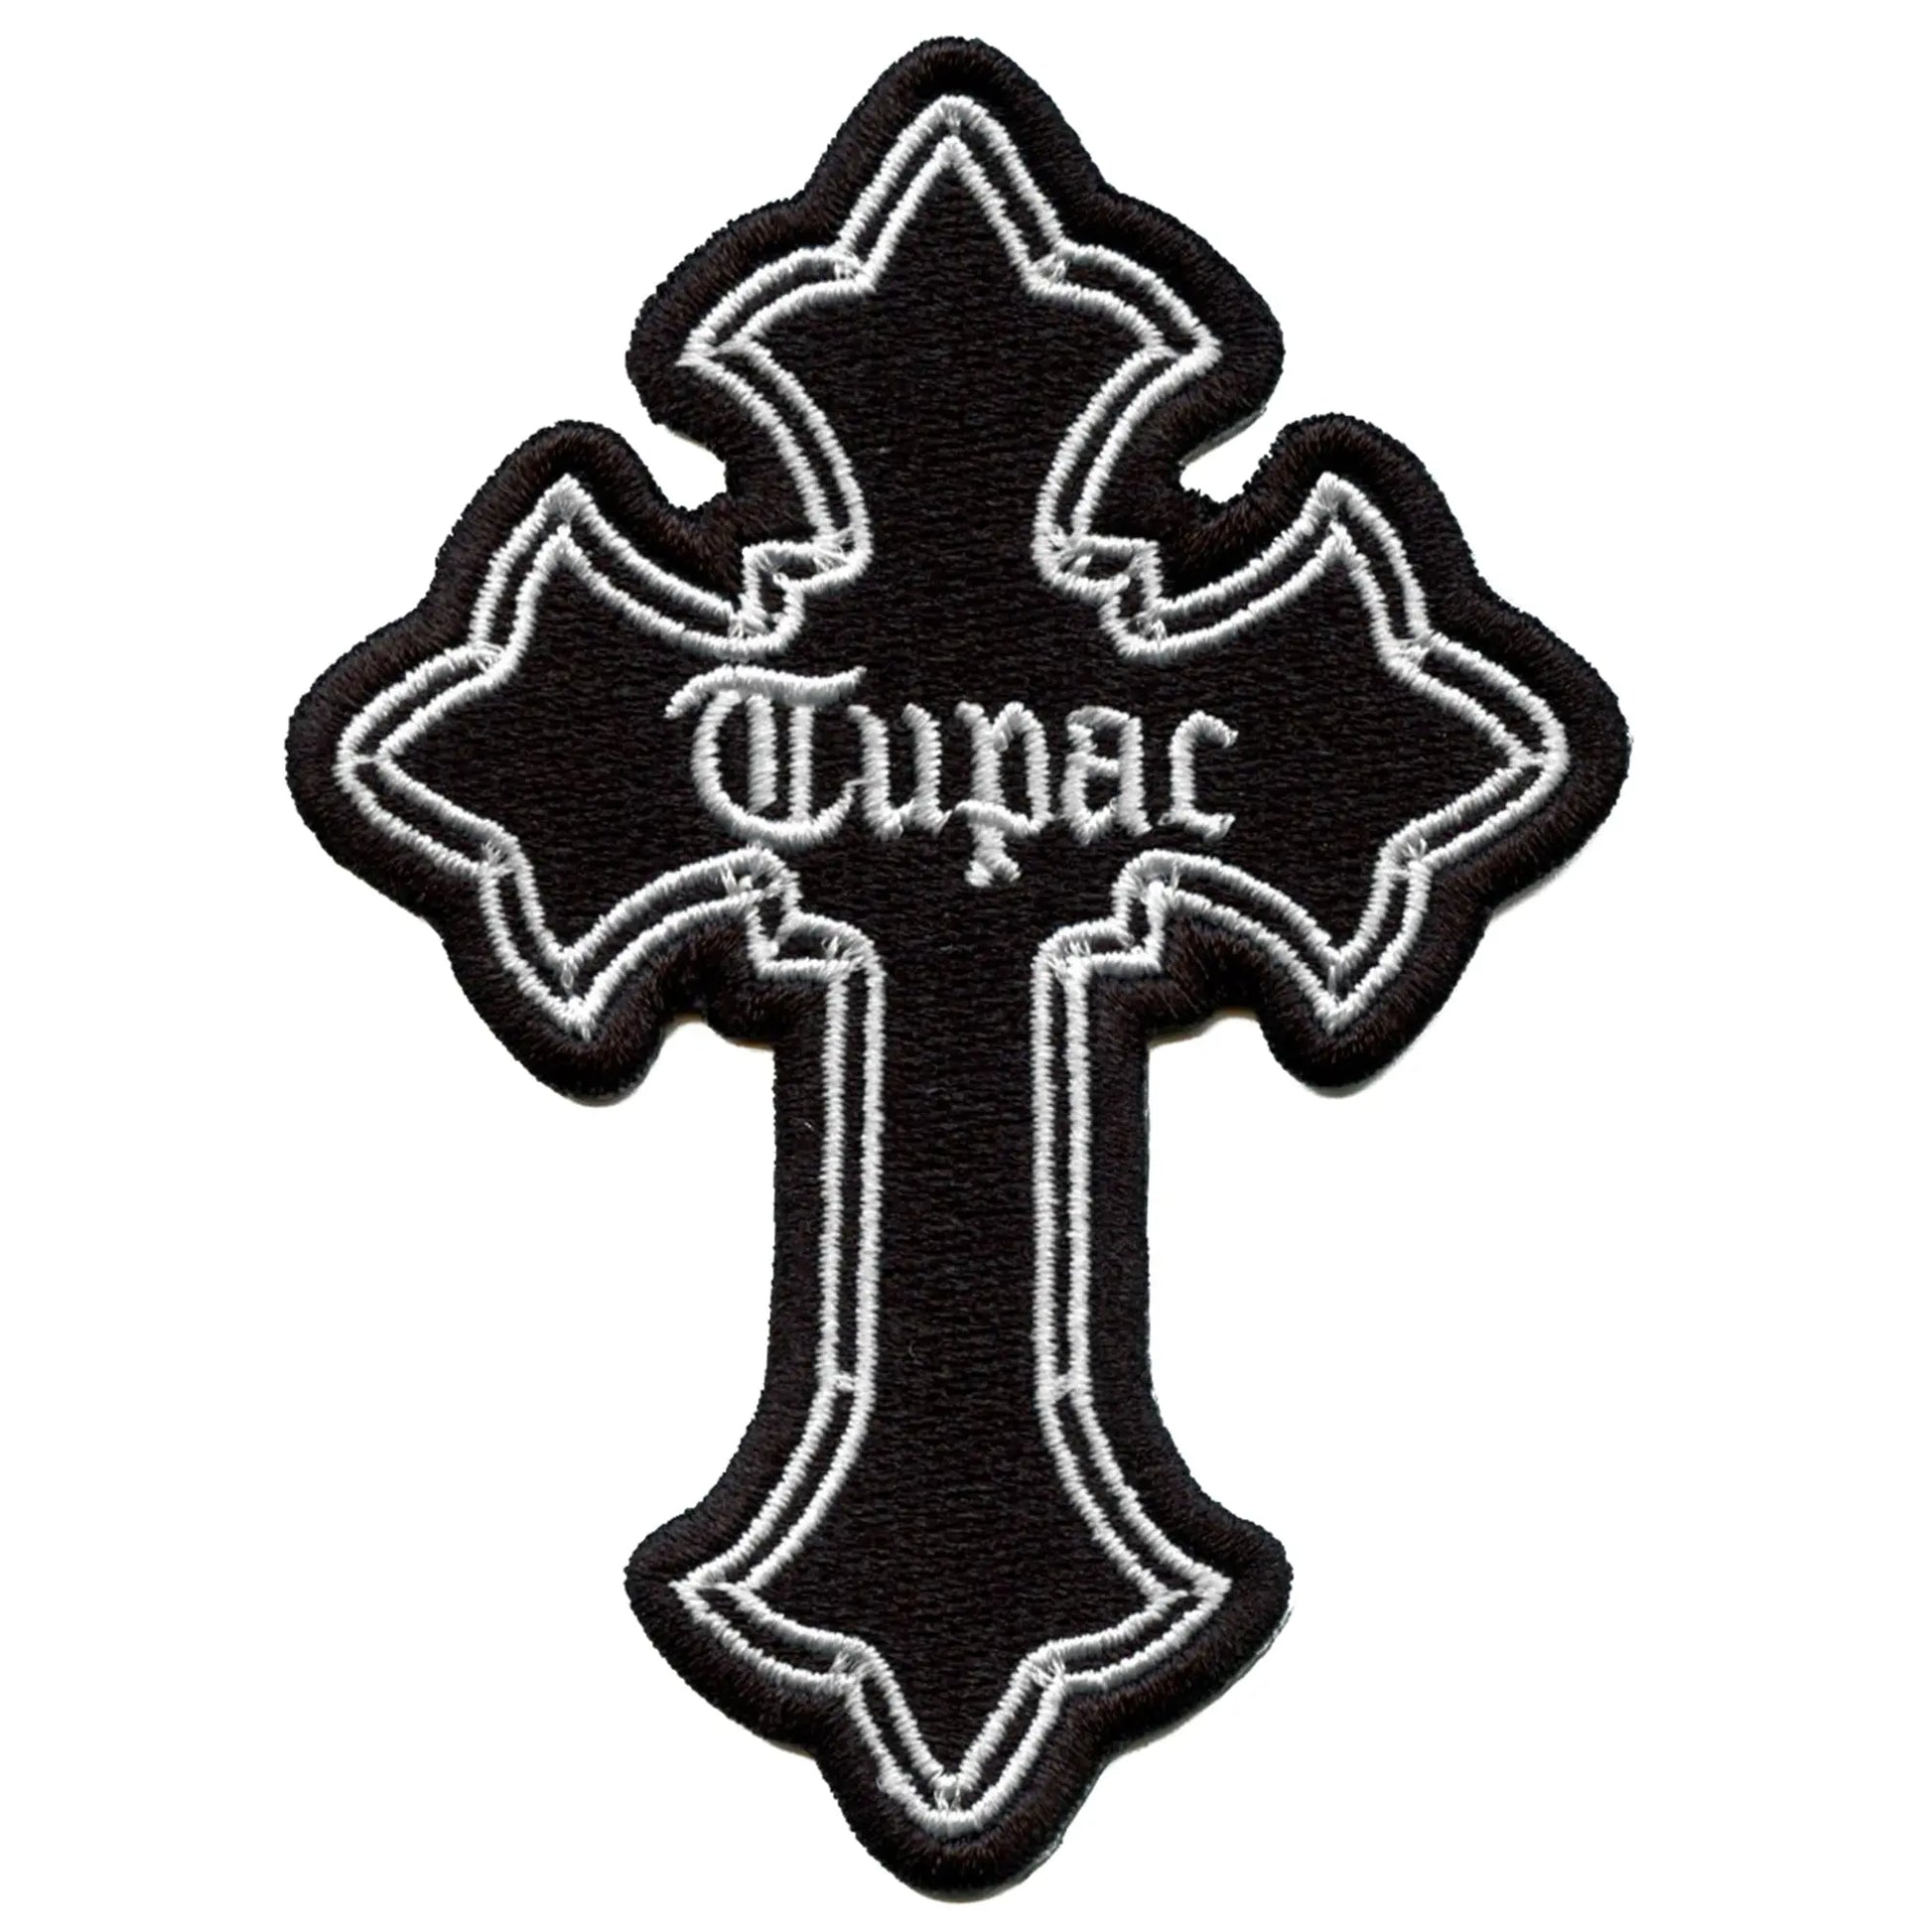 Tupac Shakur Cross Tattoo Logo Patch West Coast Rapper Embroidered Iron On